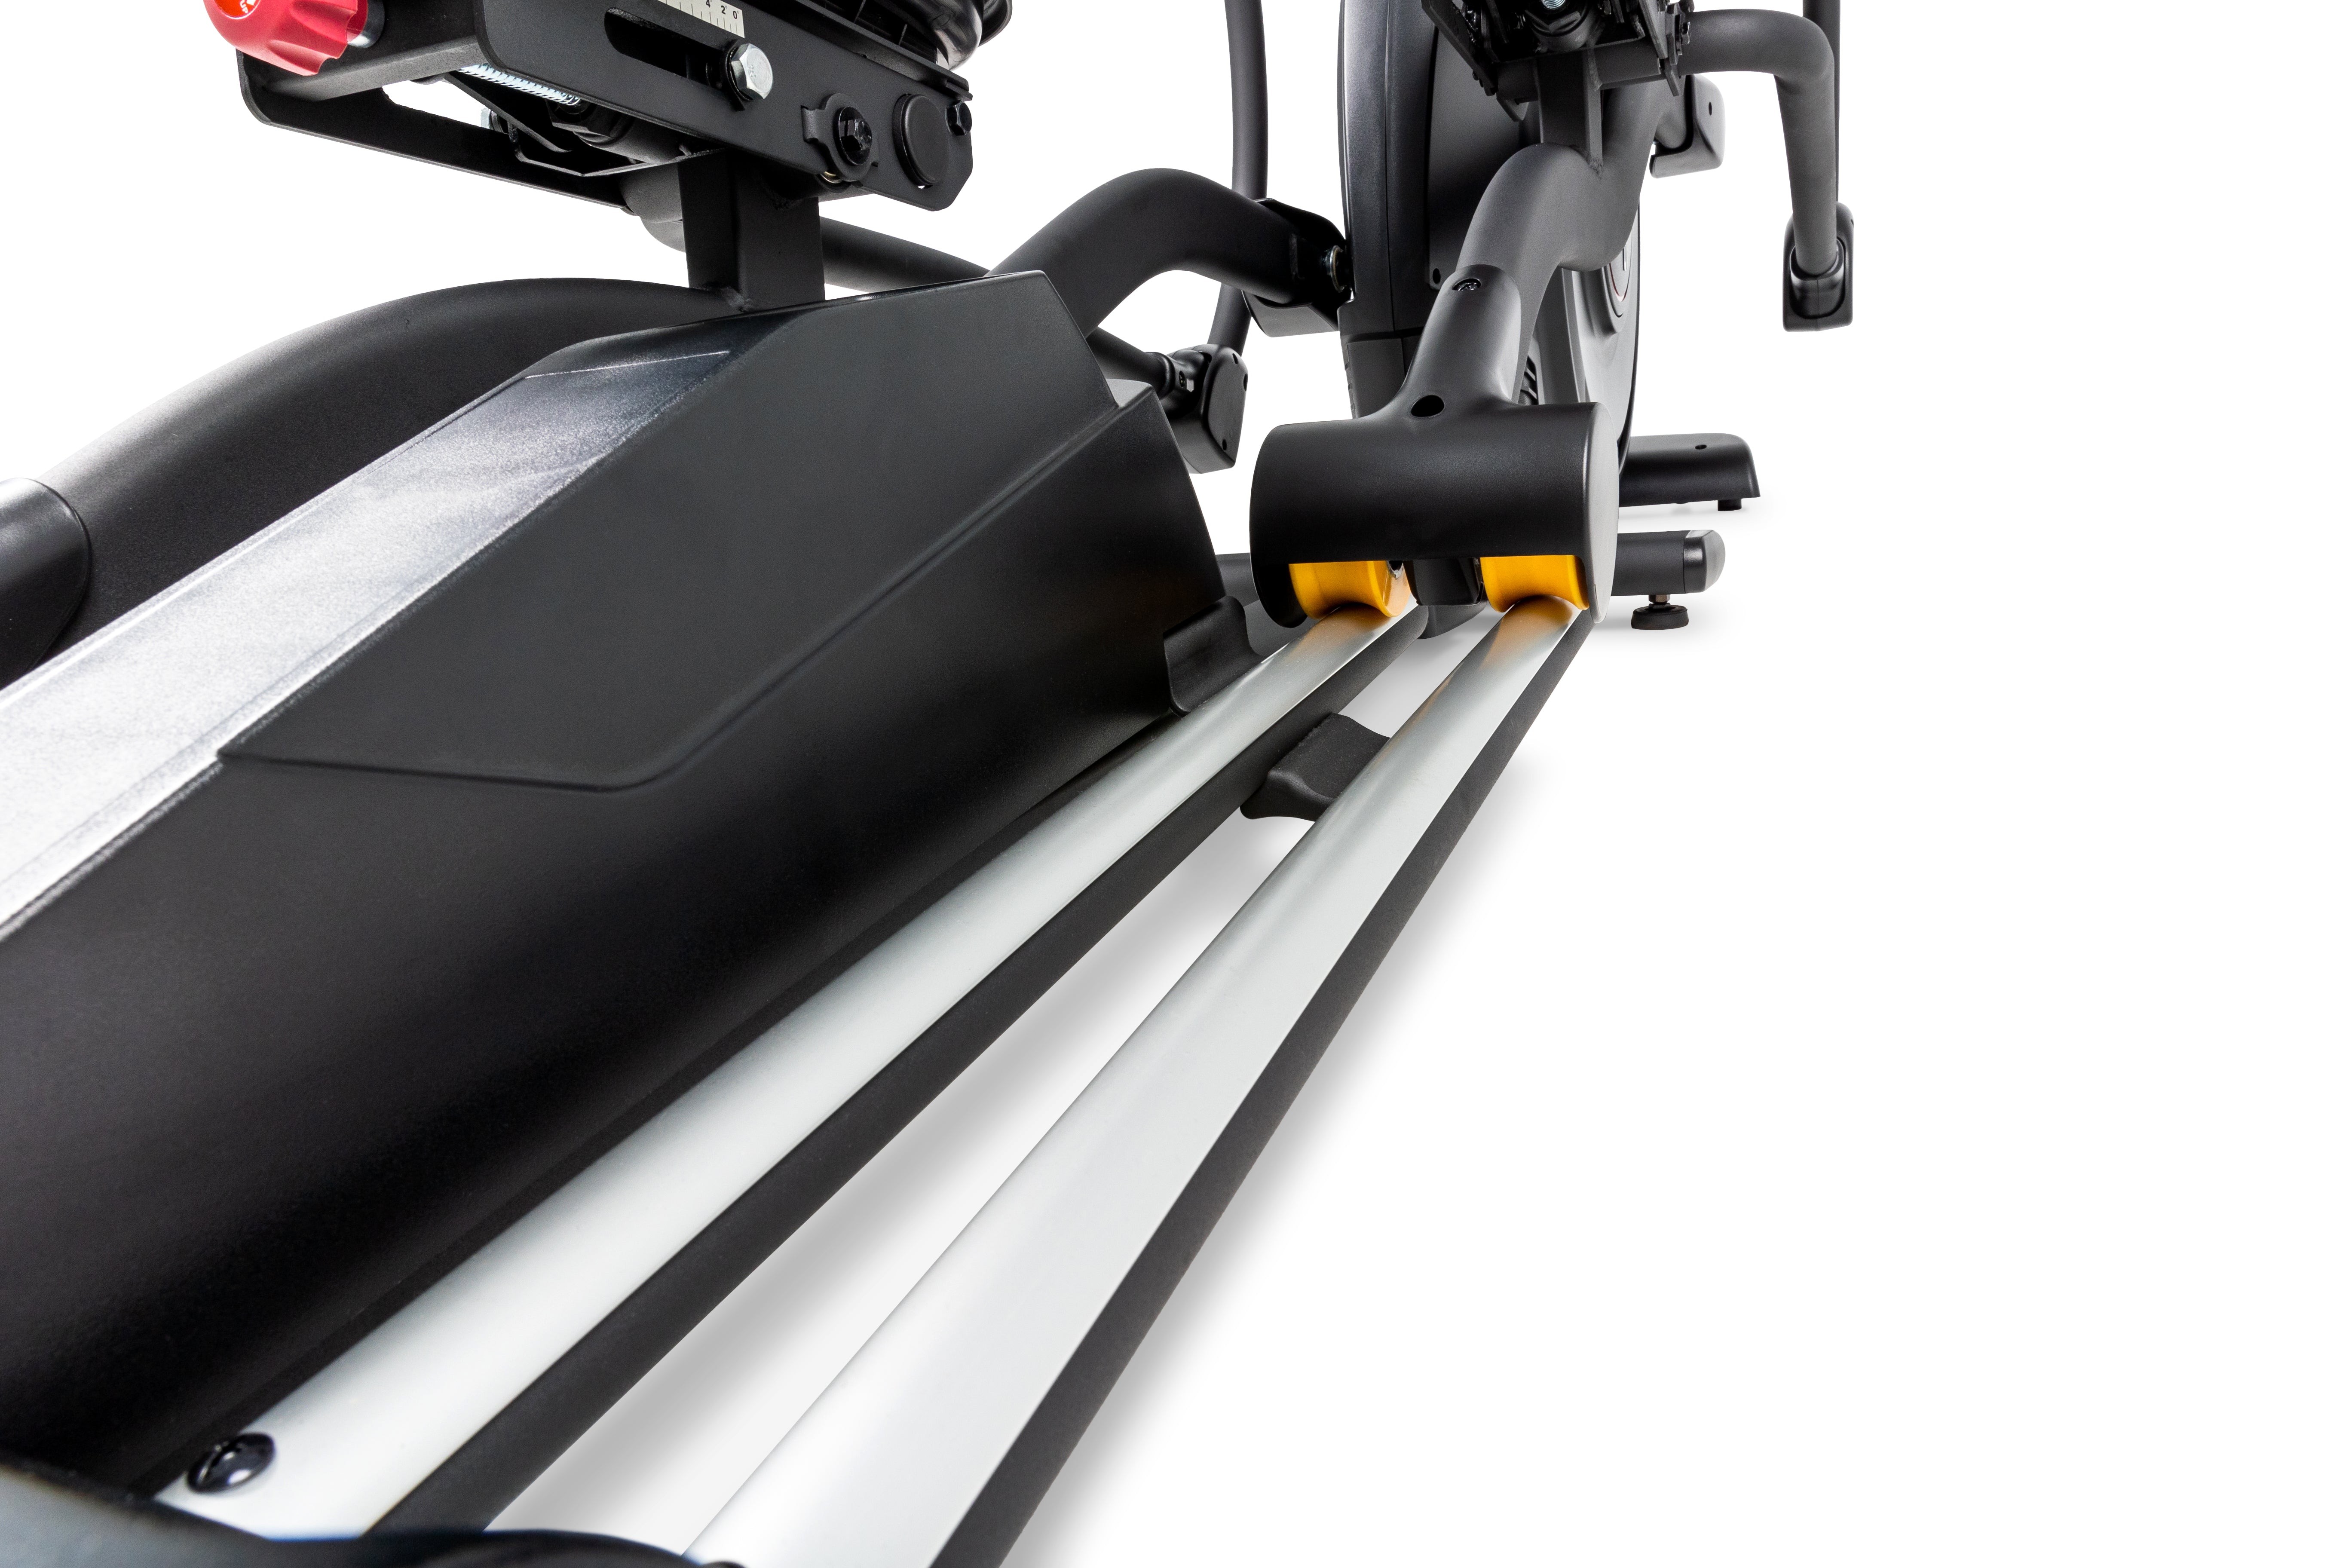 Close-up view of the Sole E95 elliptical machine showcasing its sleek black body, silver track rails, and prominent yellow roller wheels, with the handle grip and adjustment components in the background.